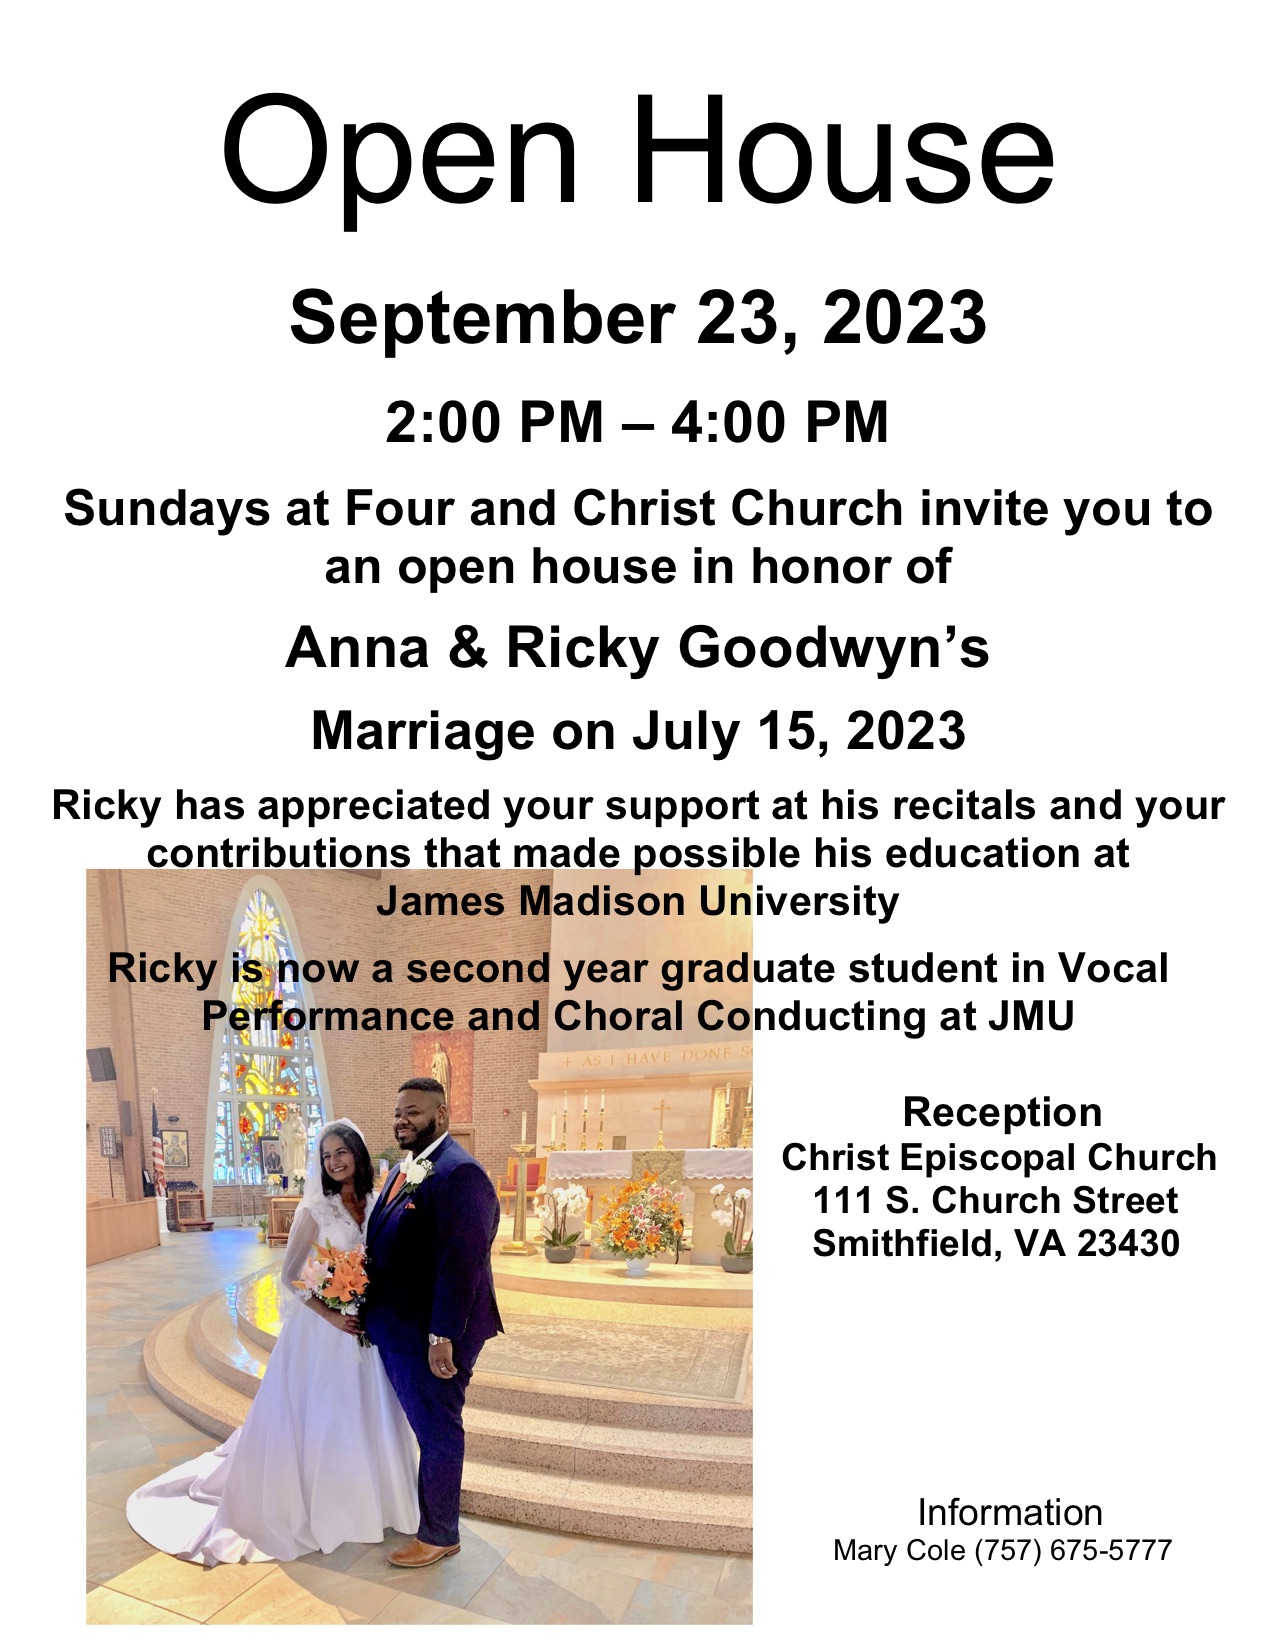 Your are Invited to an Open House for Ricky and Anna copy